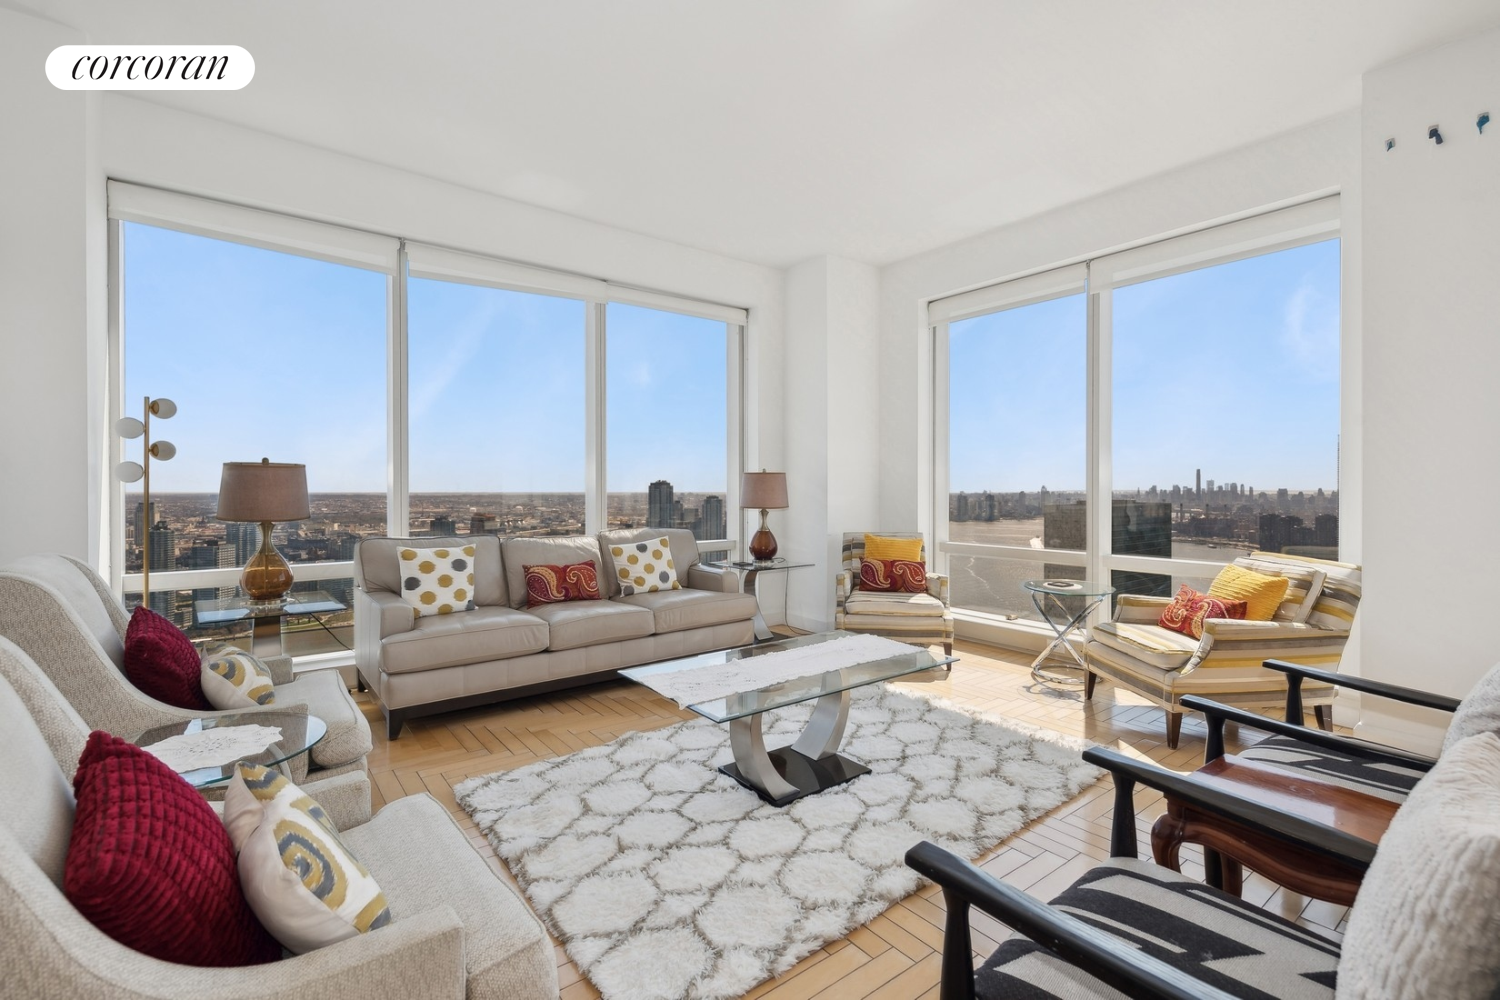 845 United Nations Plaza 57B, Turtle Bay, Midtown East, NYC - 3 Bedrooms  
3.5 Bathrooms  
6 Rooms - 